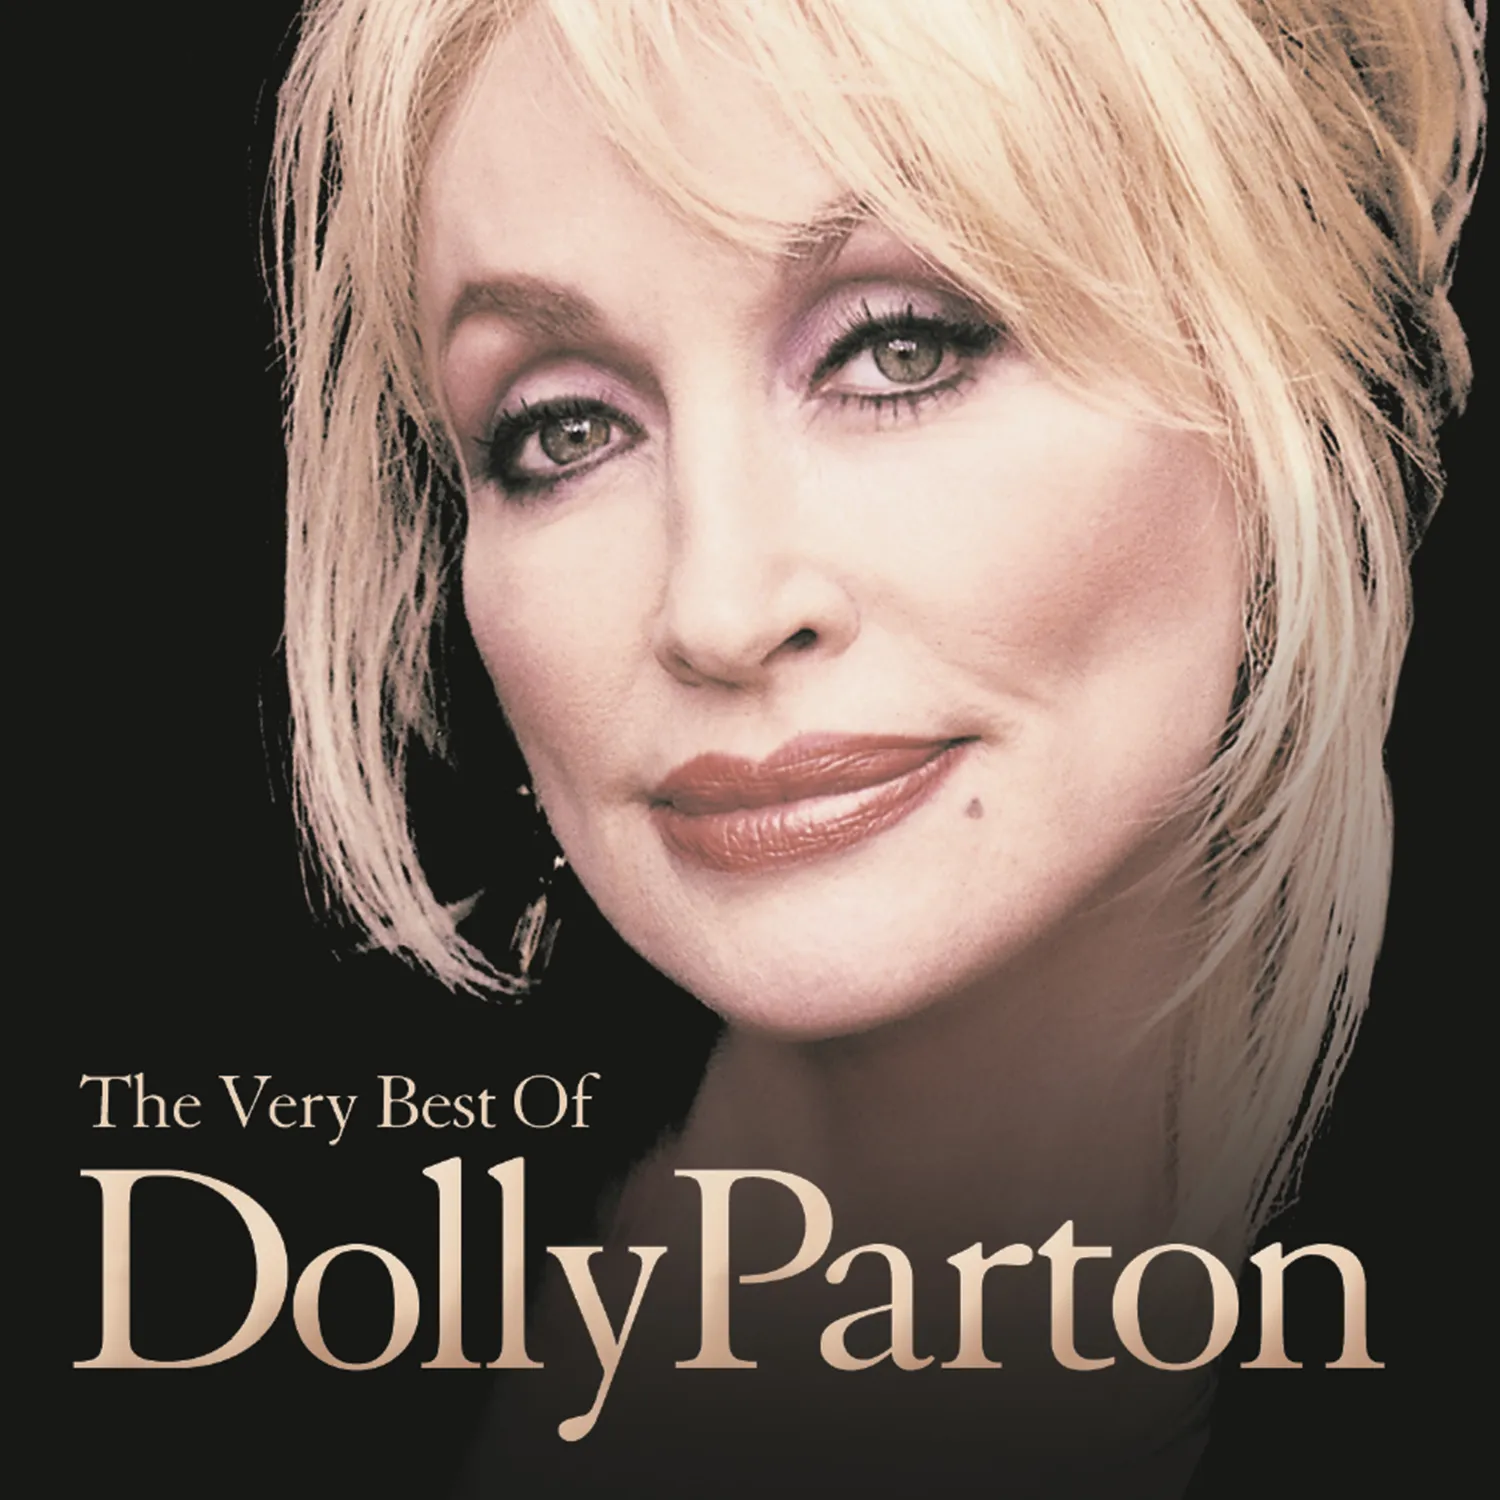 <strong>Dolly Parton - The Very Best Of</strong> (Vinyl LP - black)